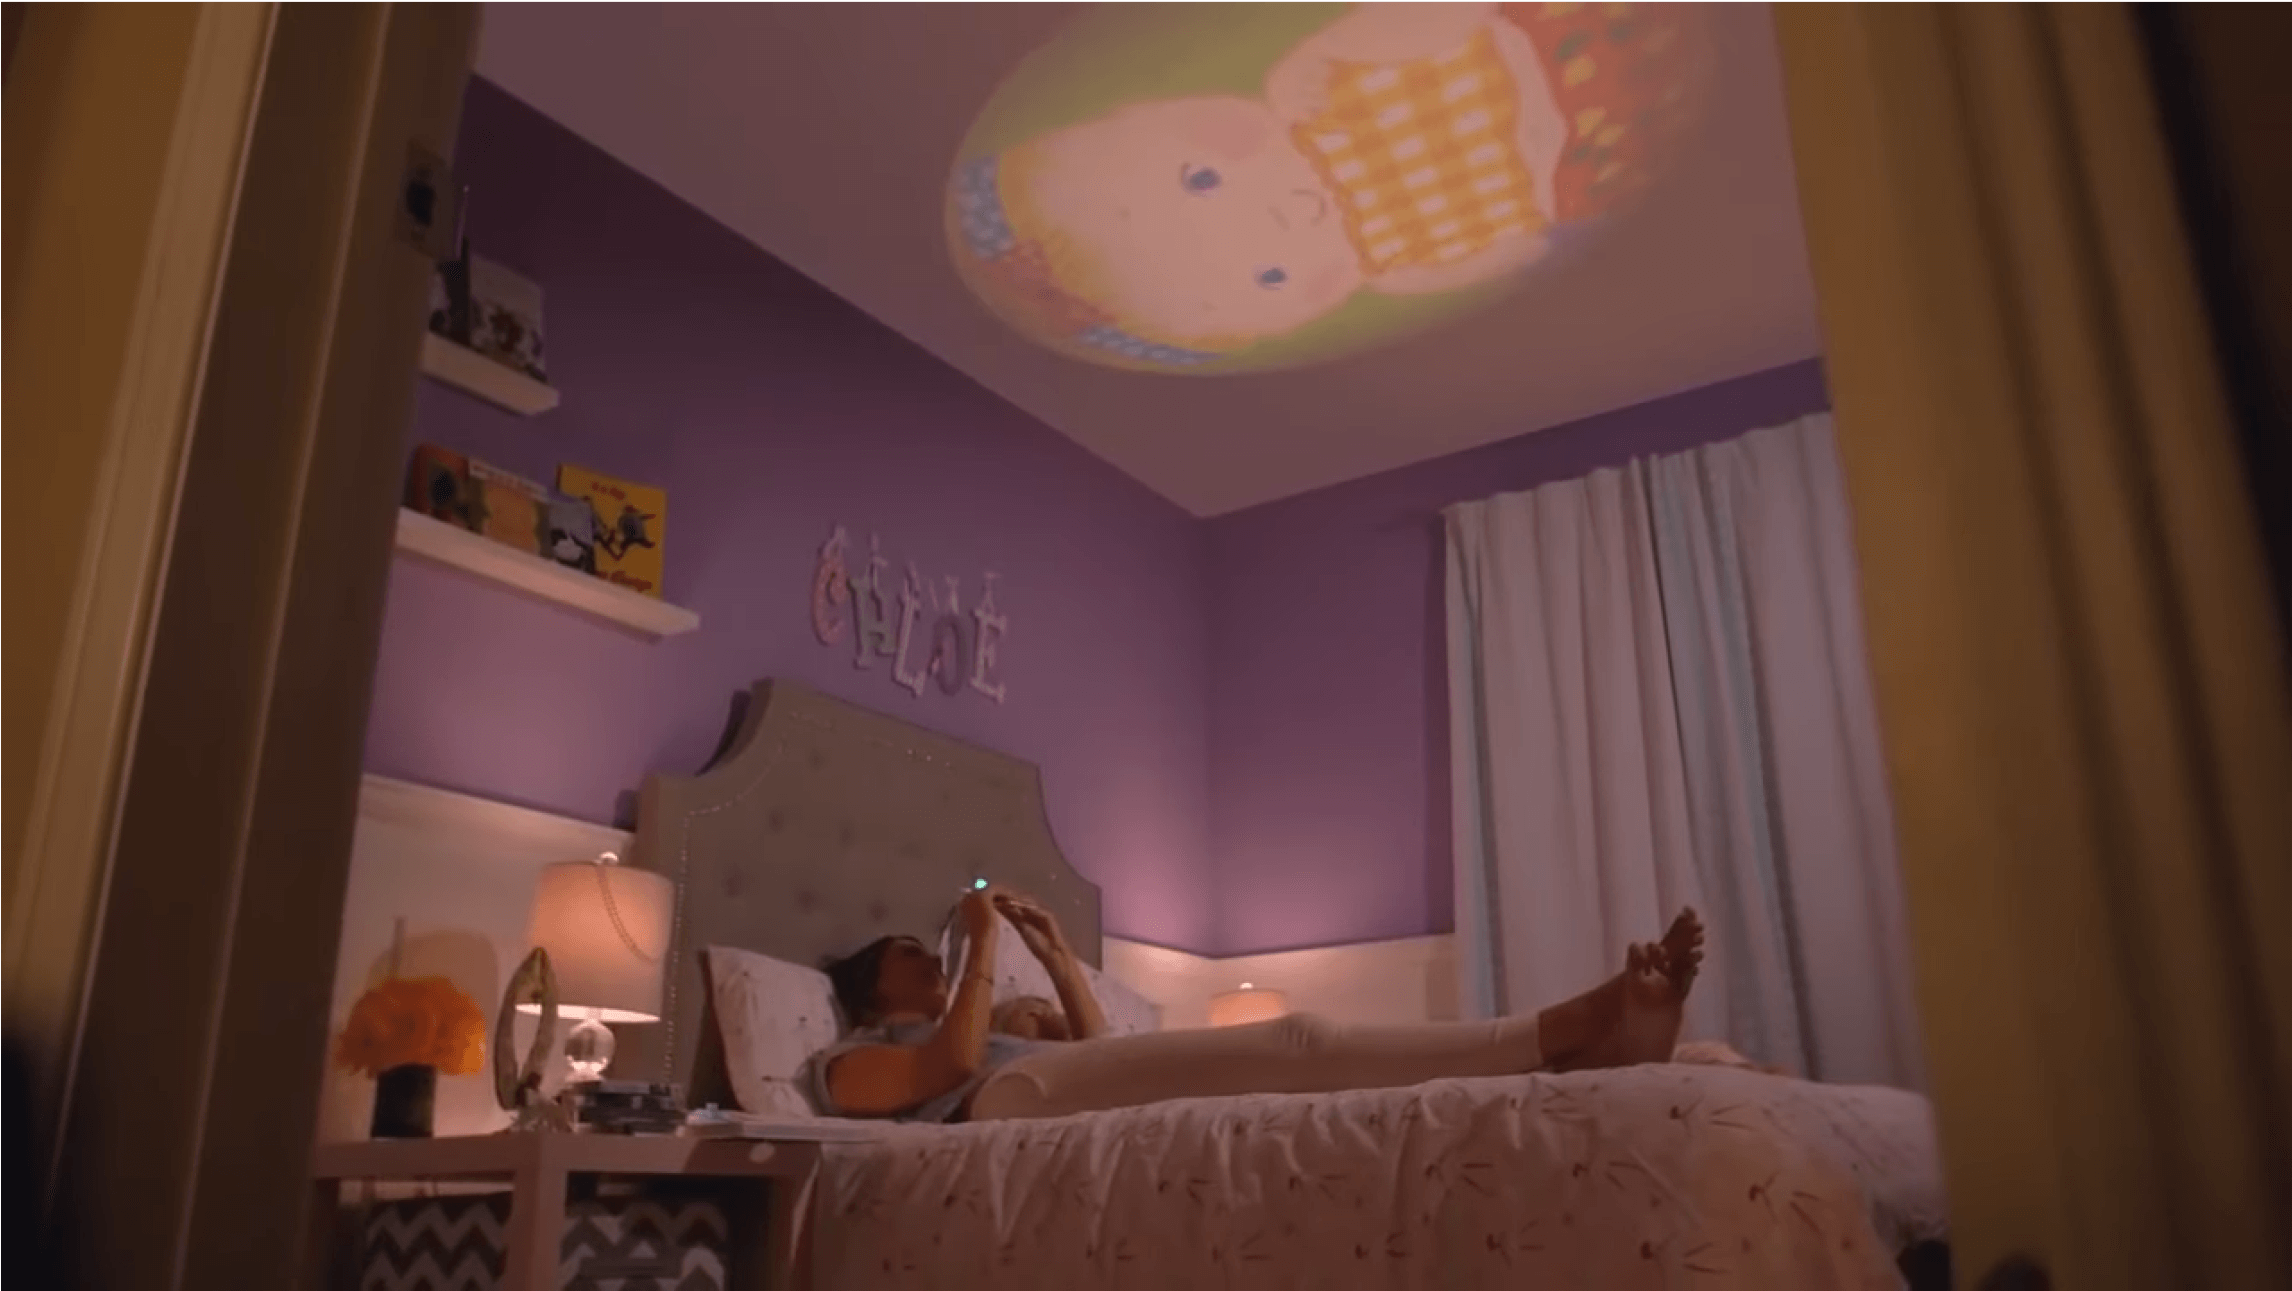 Video of a mother projecting a story book from Moonlite Collection